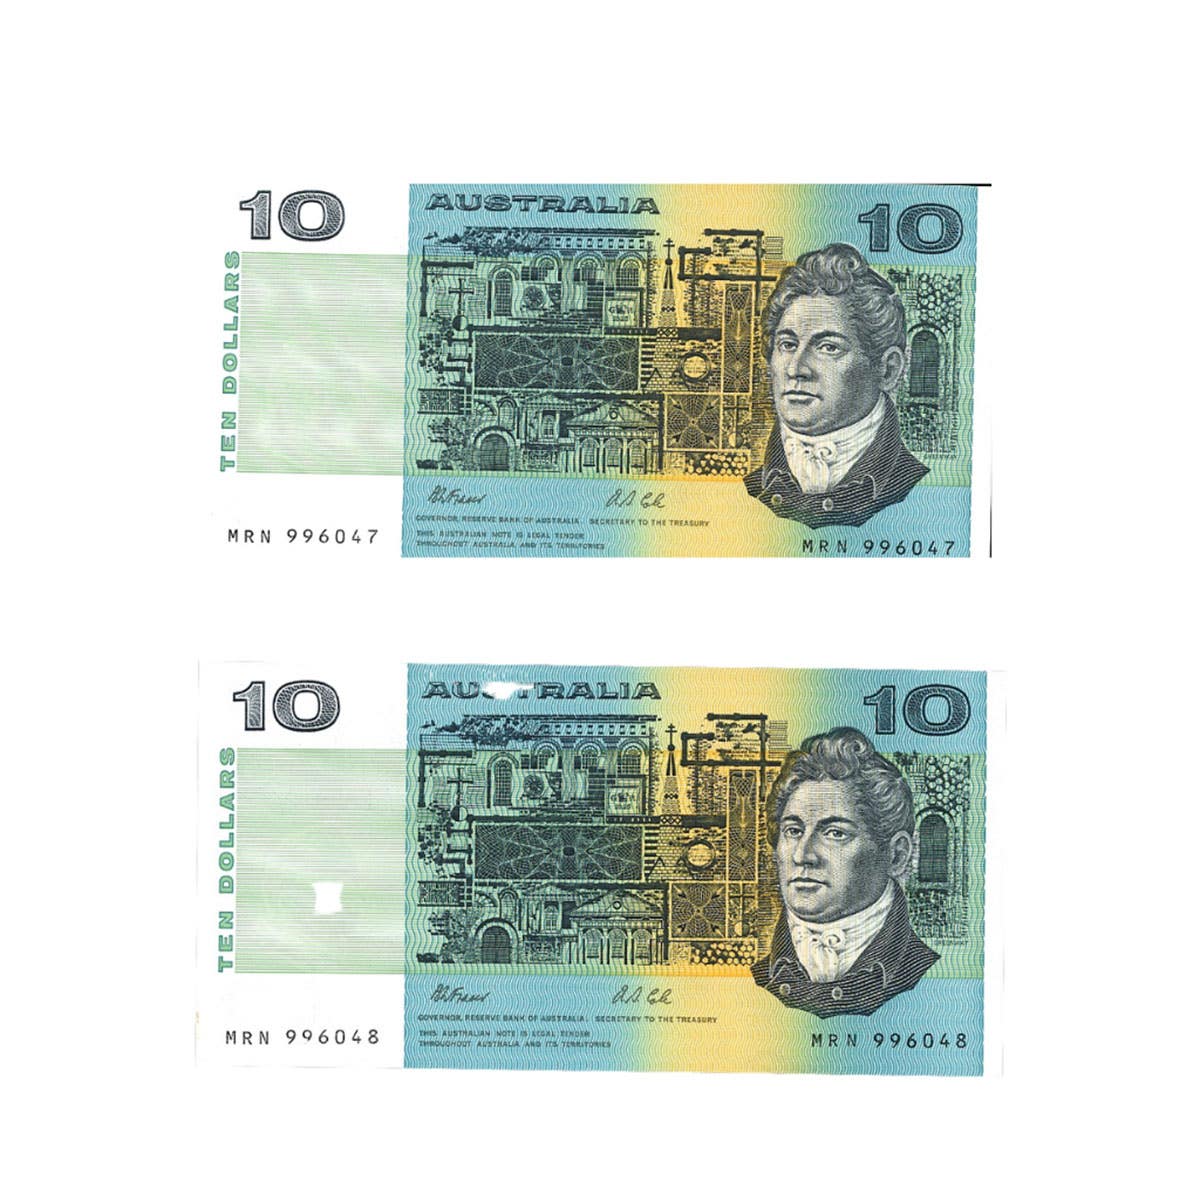 1991 R313b $10 Fraser/Cole no Plate Identification letter (PIL) Banknote Consecutive Pair Uncirculated